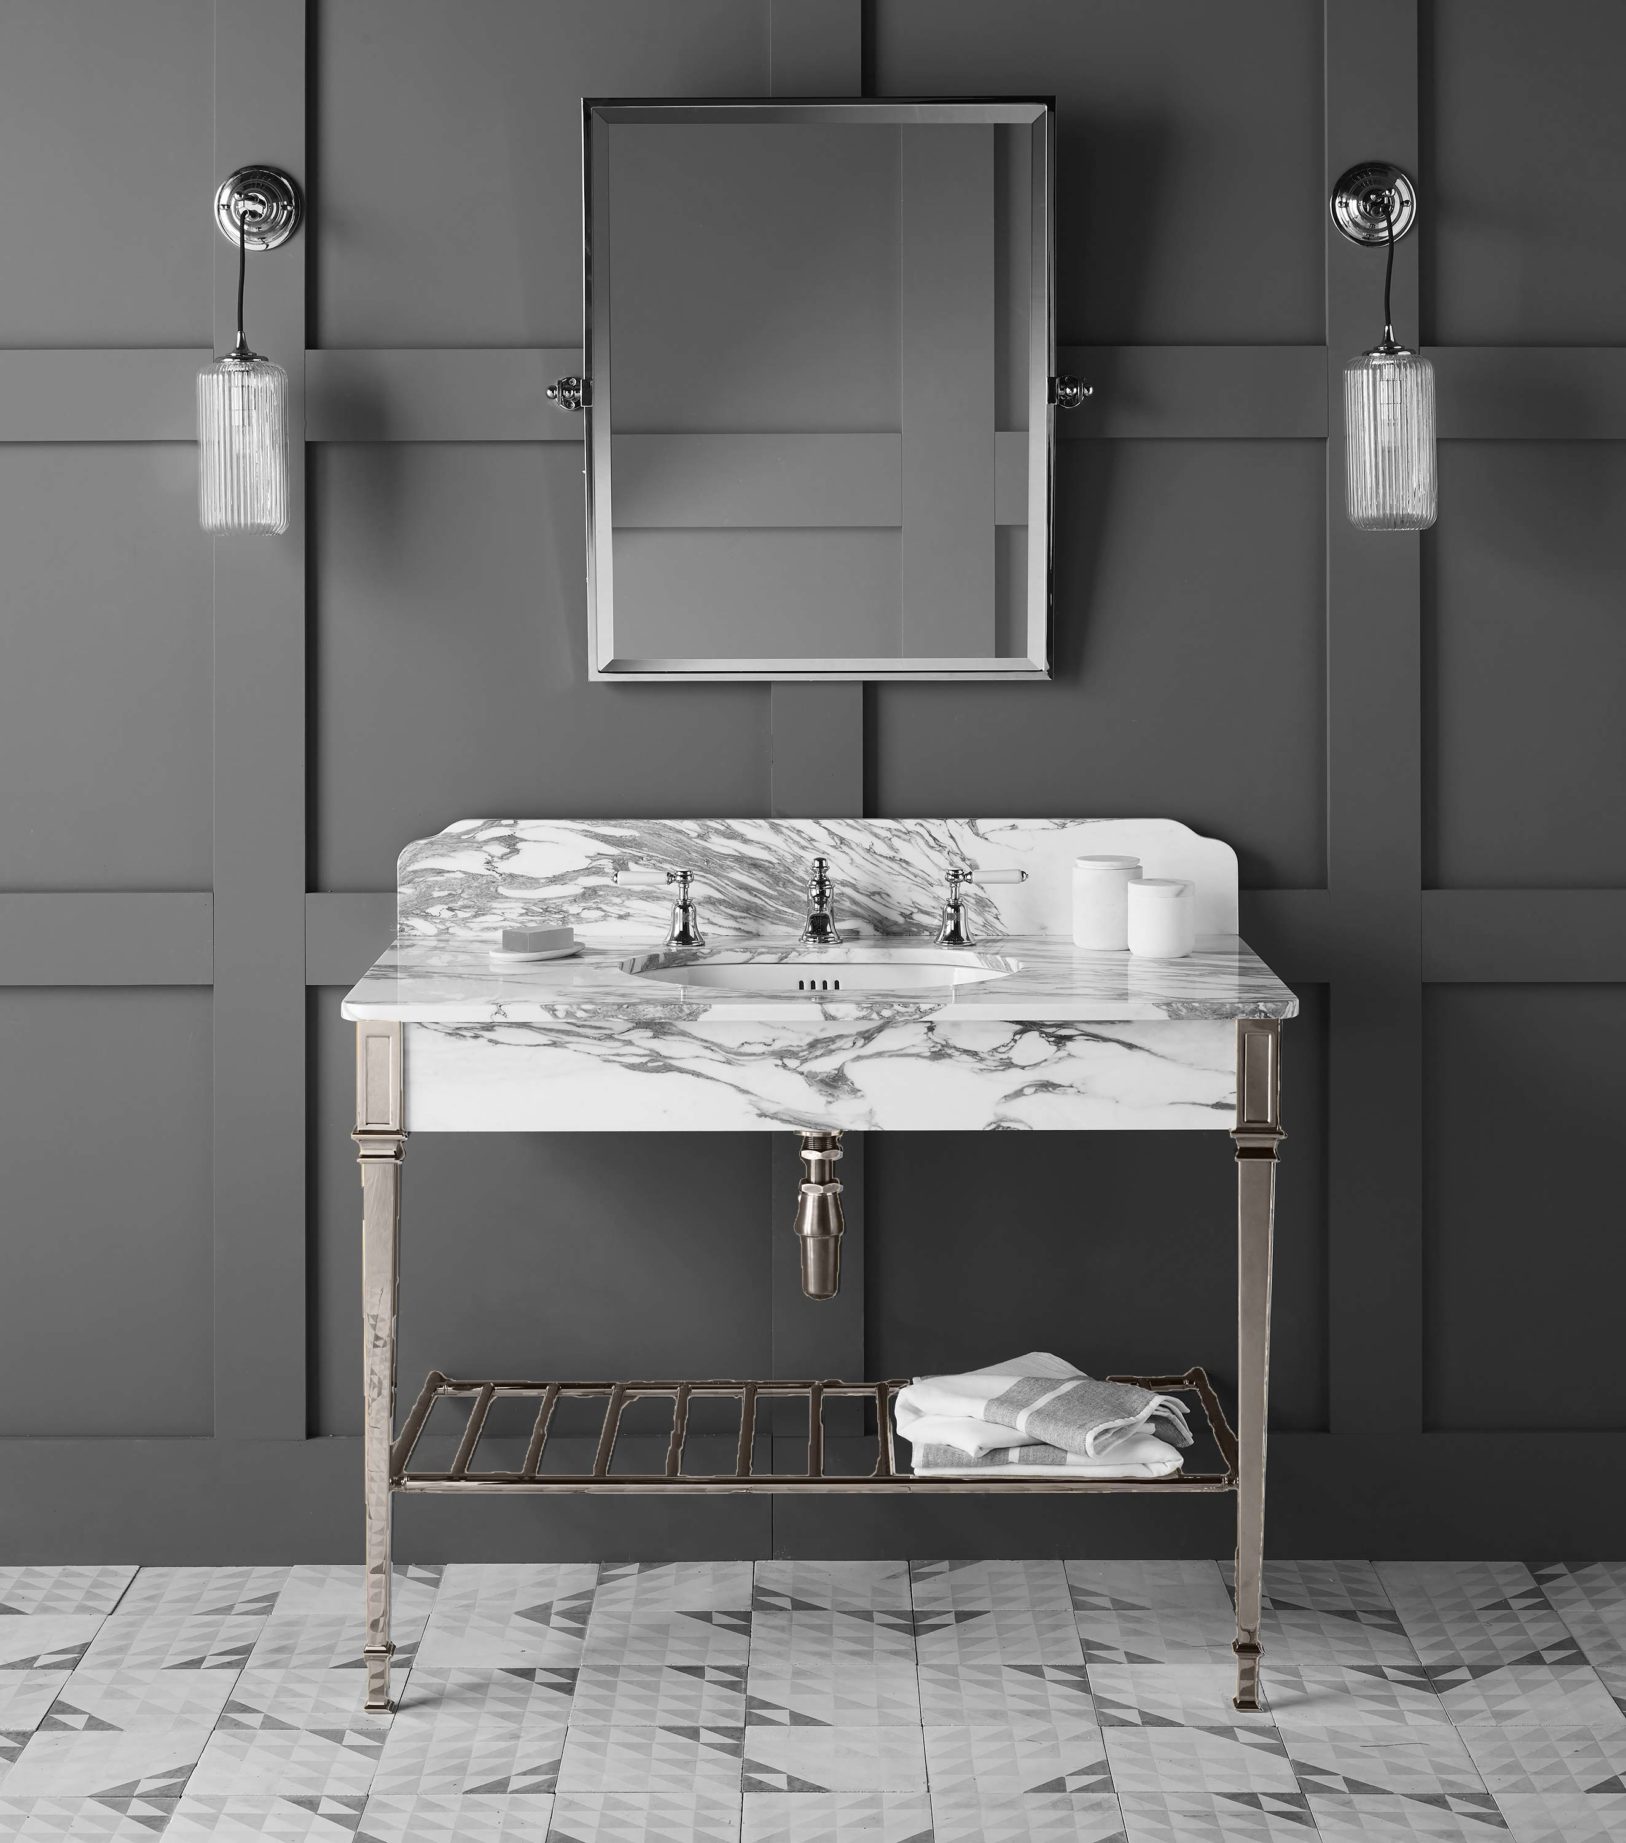 The Single Thames Basin Stand in chrome finish